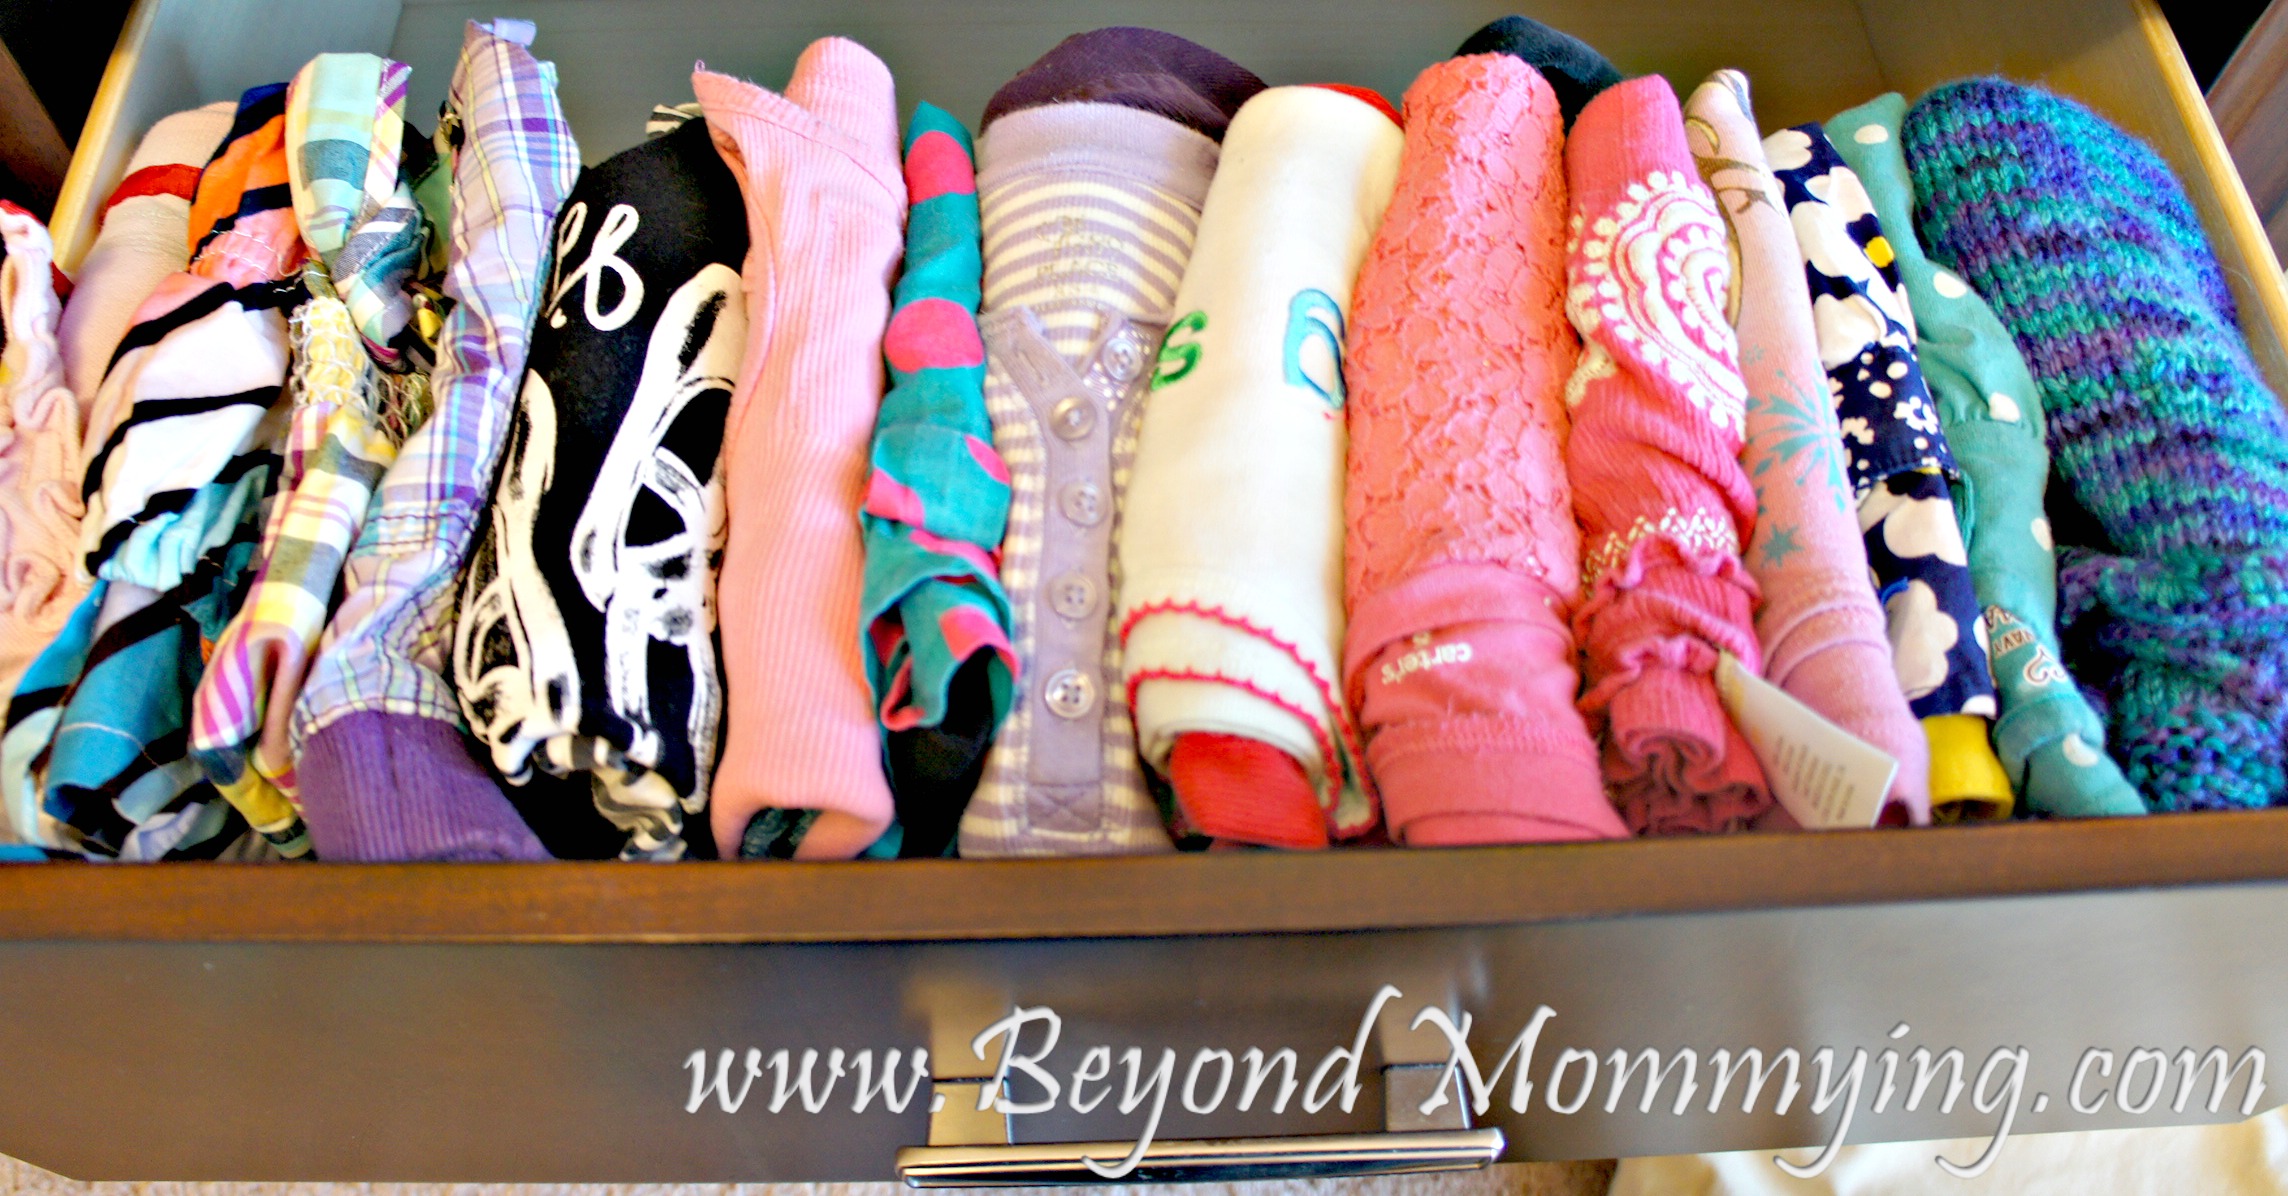 Keep kid's drawers tidy by folding outfits together and lining them up rather than stacking